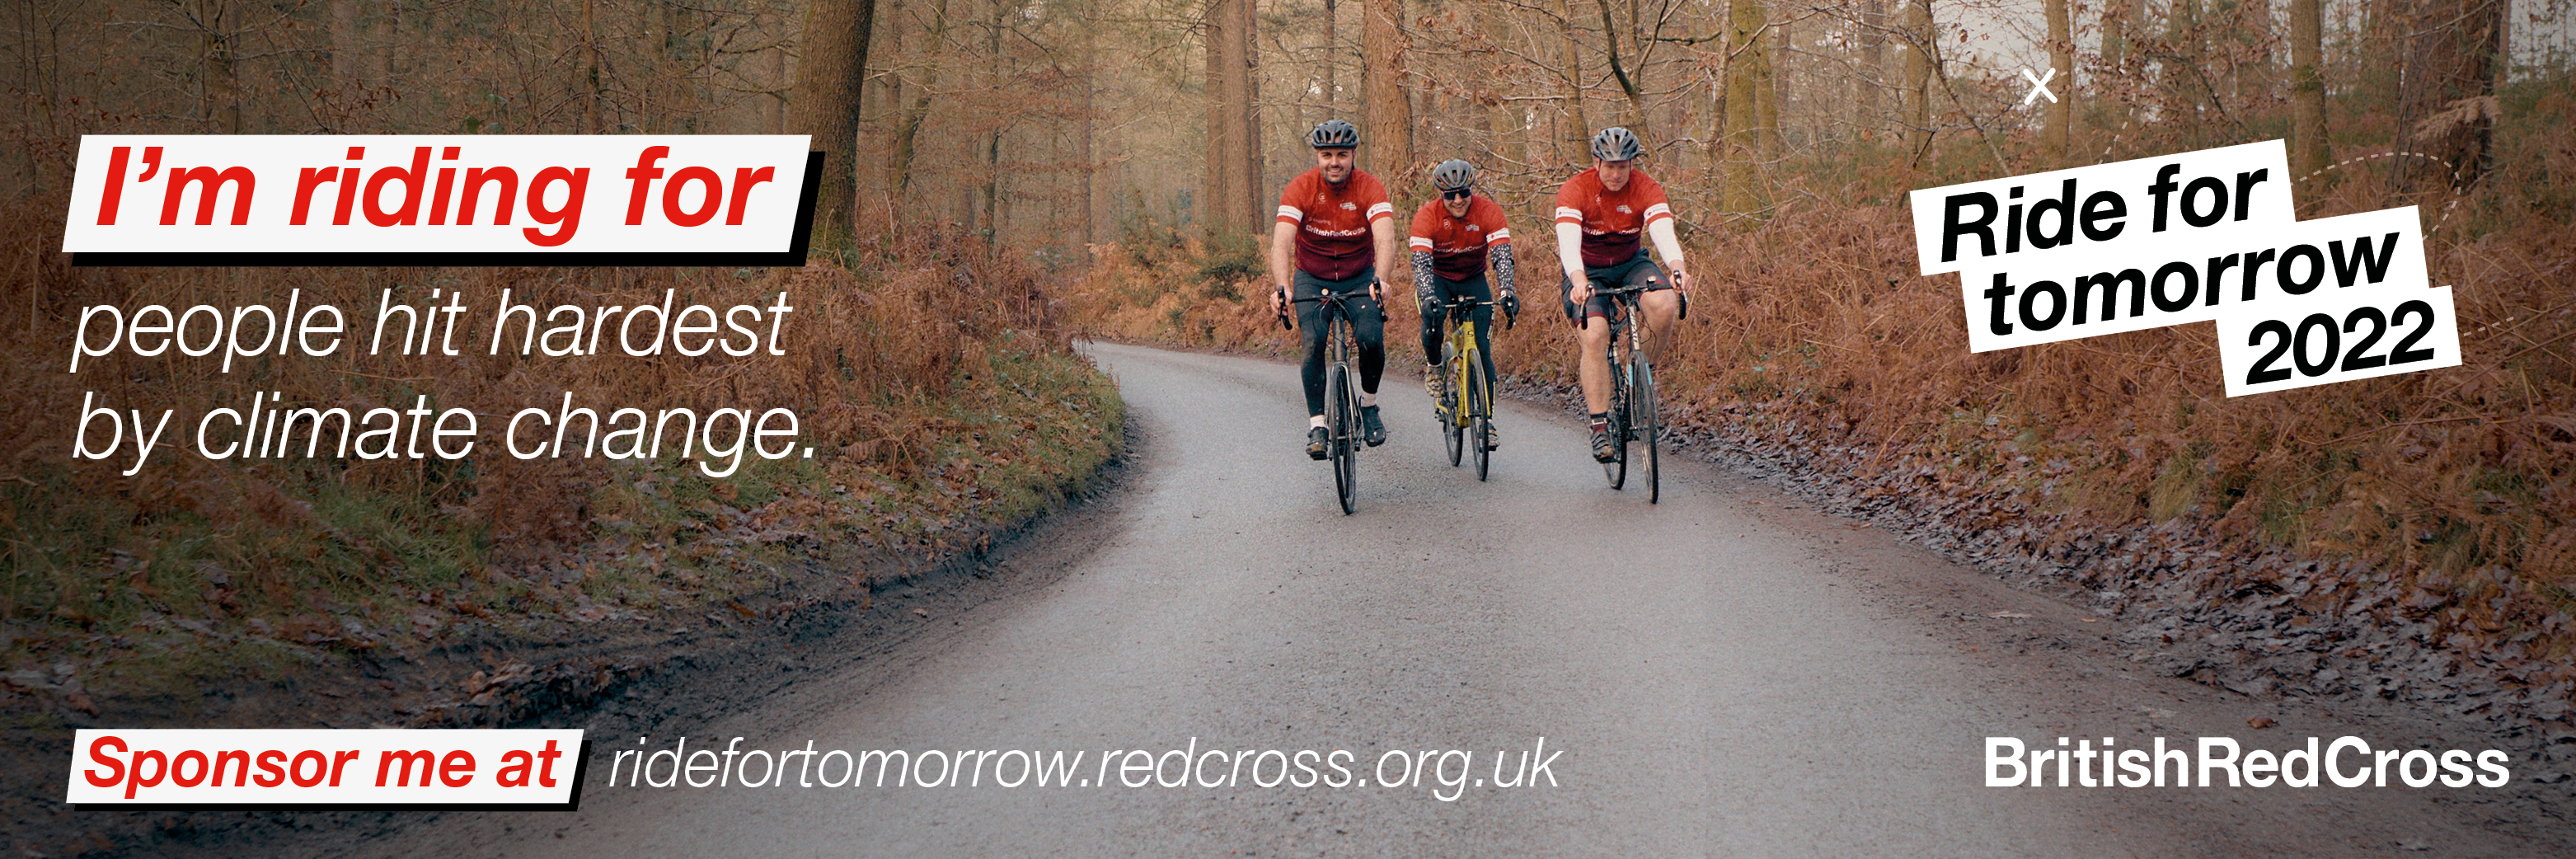 Three cyclists side by side on a tree-lined road with text 'I'm riding for people hit hardest by climate change'.